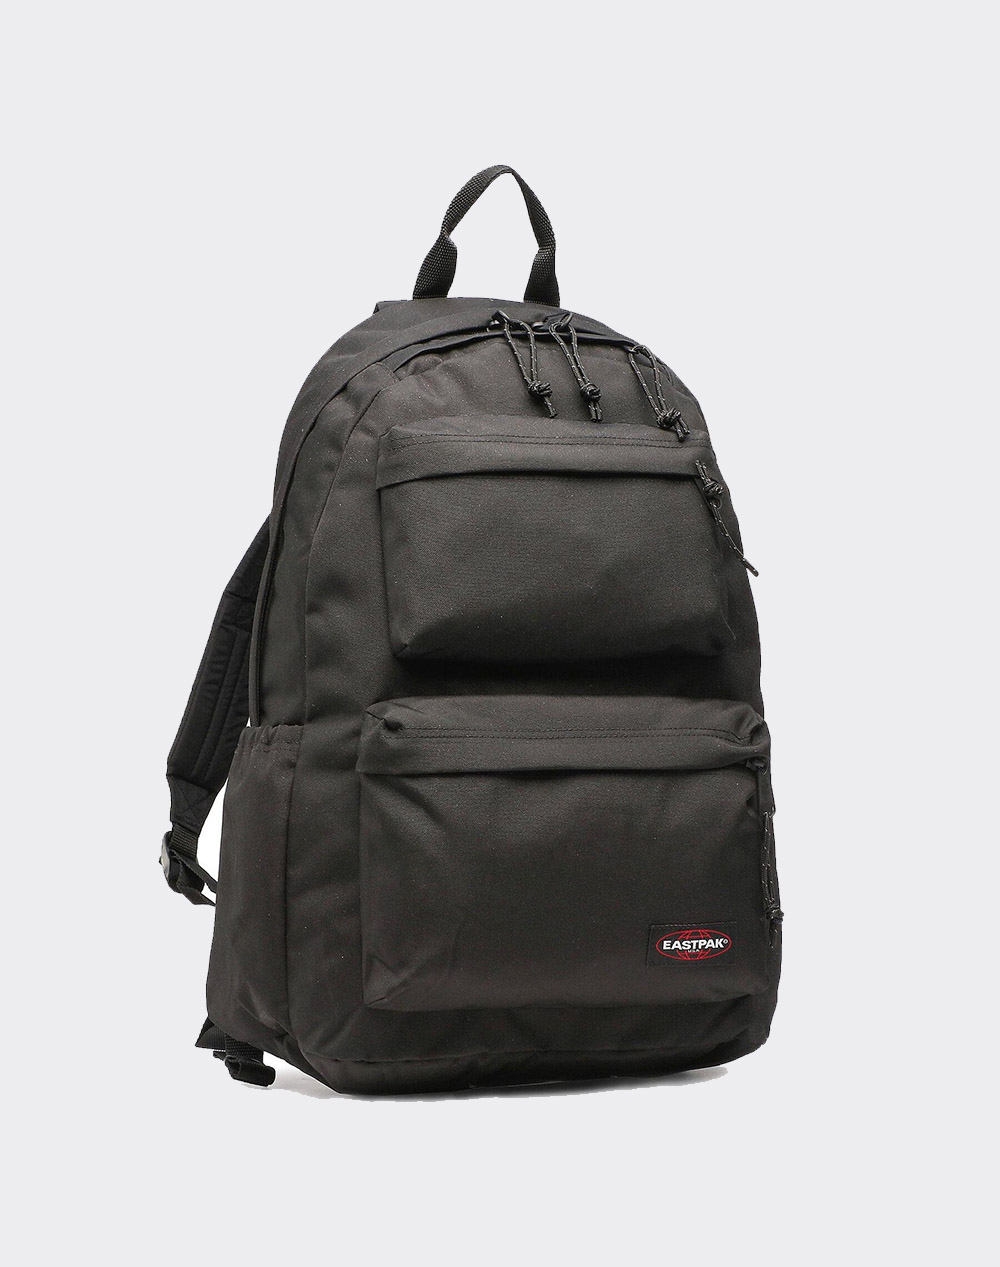 EASTPAK PADDED DOUBLE ΤΣΑΝΤΑ (Διαστάσεις: 47 x 30 x 8 εκ.) EK0A5B7Y-EK008 JetBlack 0400BEAST6220088_XR14515